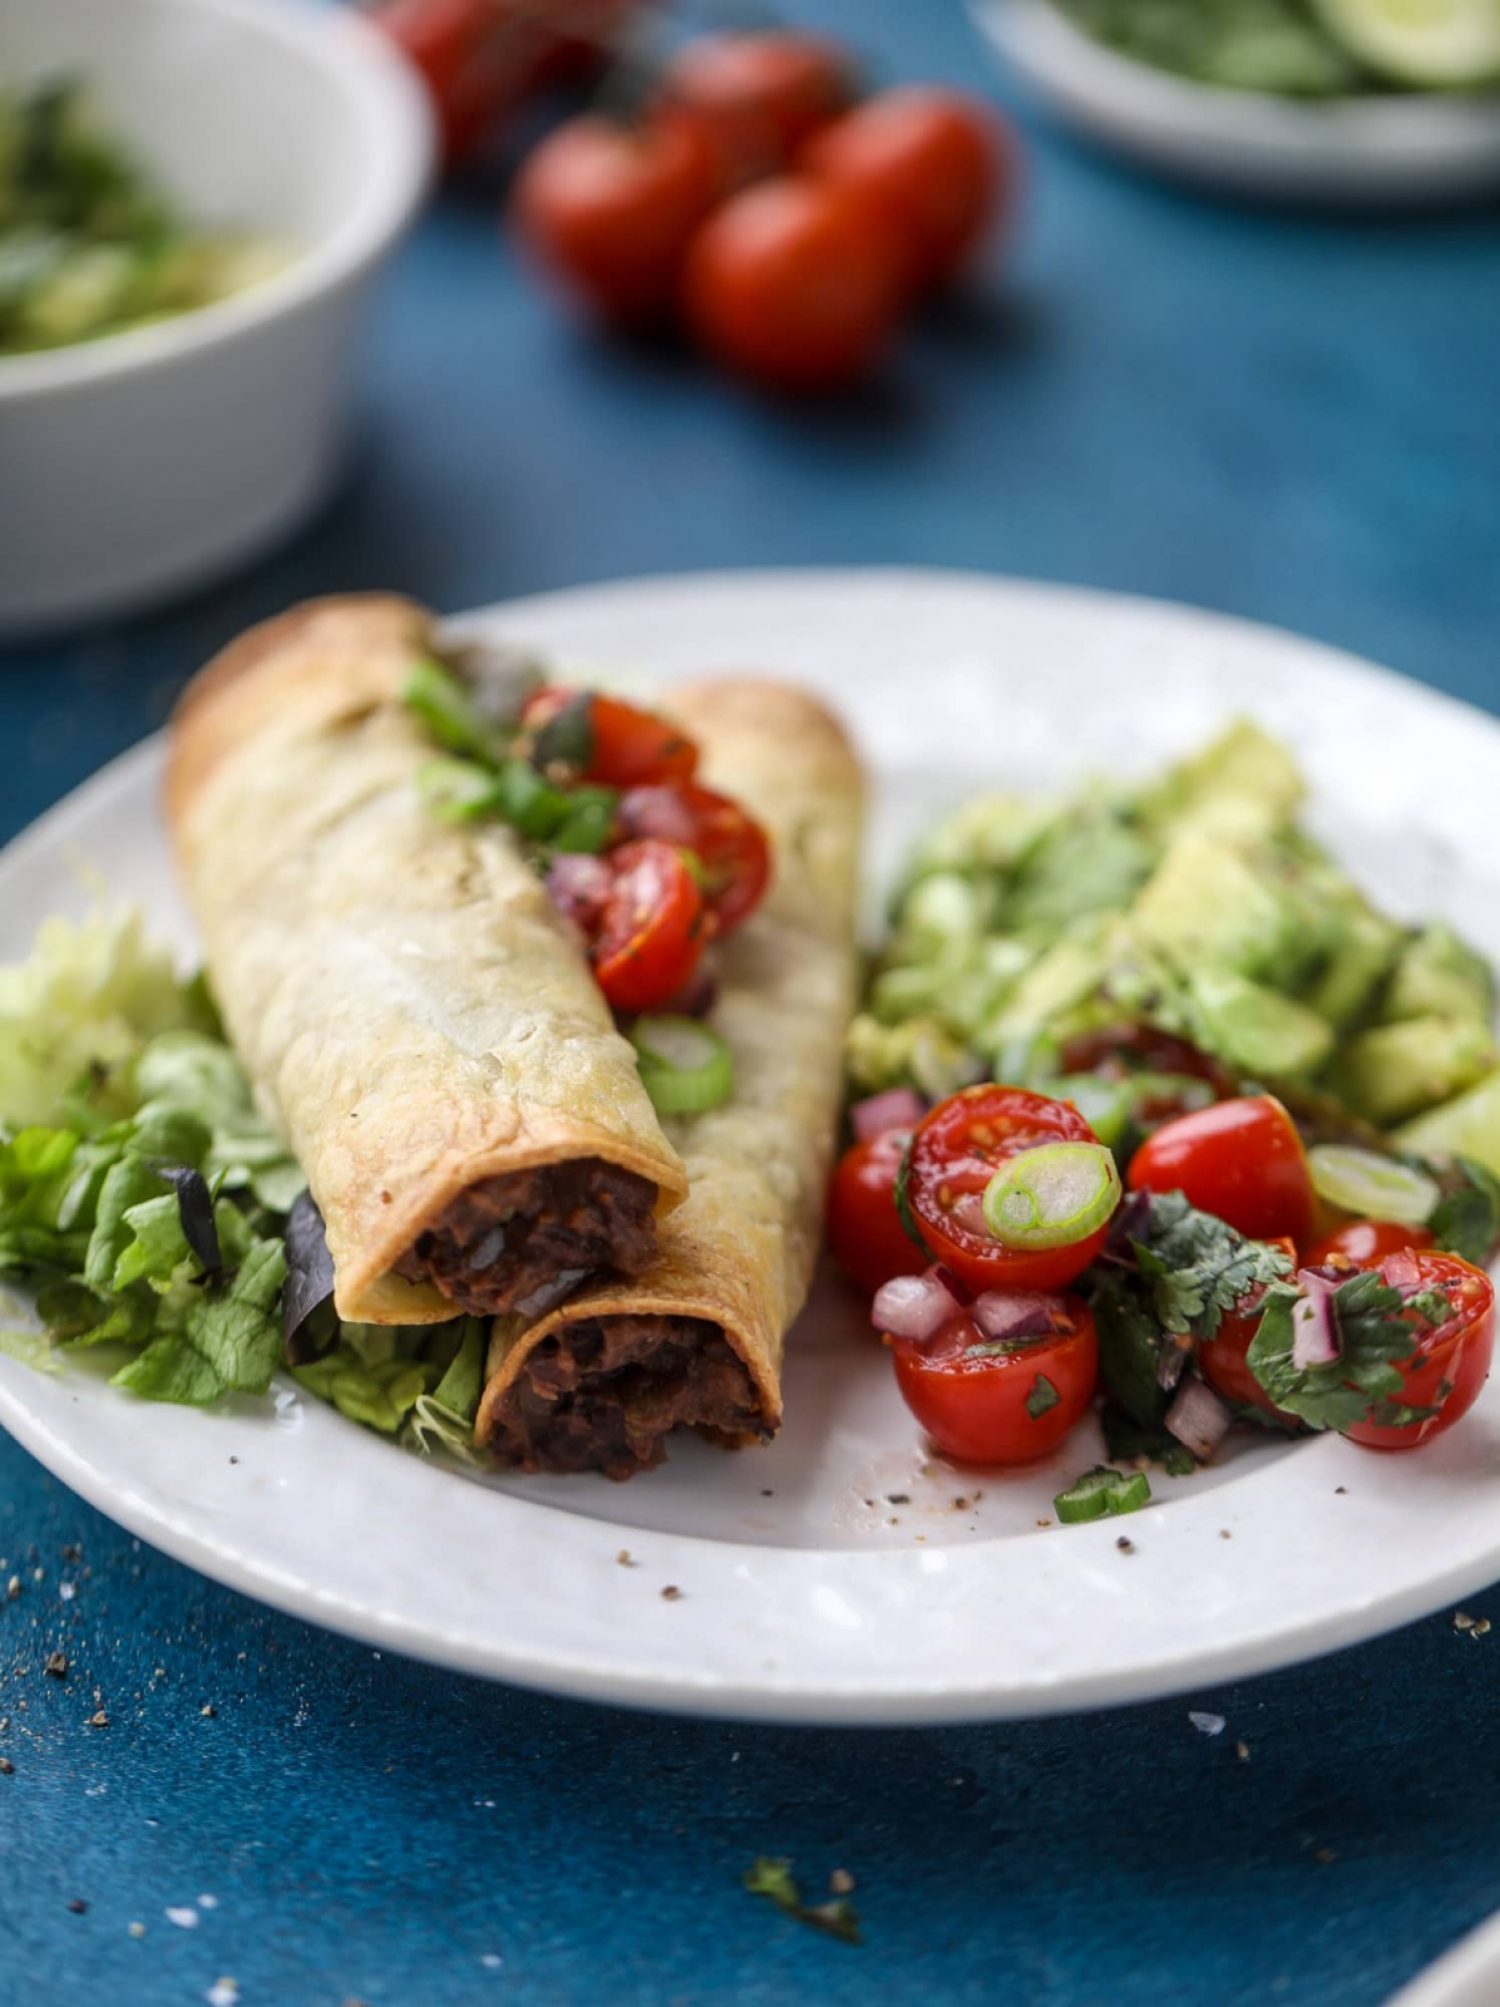 <p>Forget the frozen taquitos, and make <a href="https://www.howsweeteats.com/2019/02/taquitos/" rel="noopener">this smoky, flavorful recipe</a> with canned black beans, a bevy of spices and a refreshing avocado pico on the side. They're so good they don't even need cheese (although no one will judge if you add some).</p>